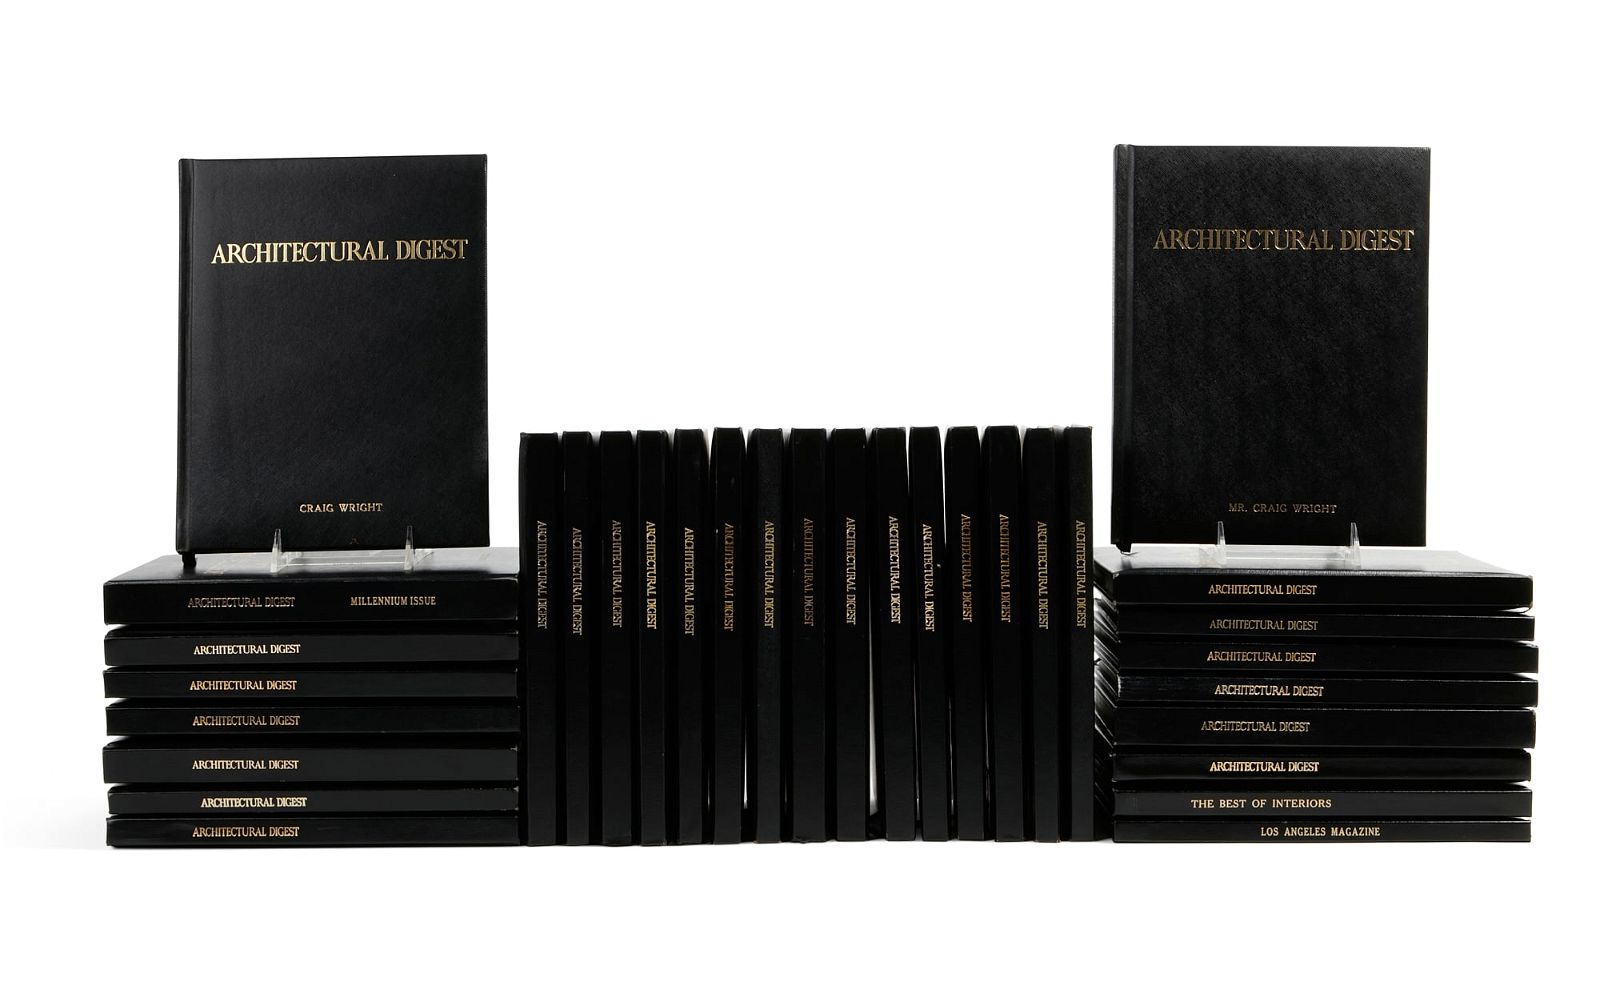 CUSTOM BOUND ARCHITECTURAL DIGEST 2fb36be